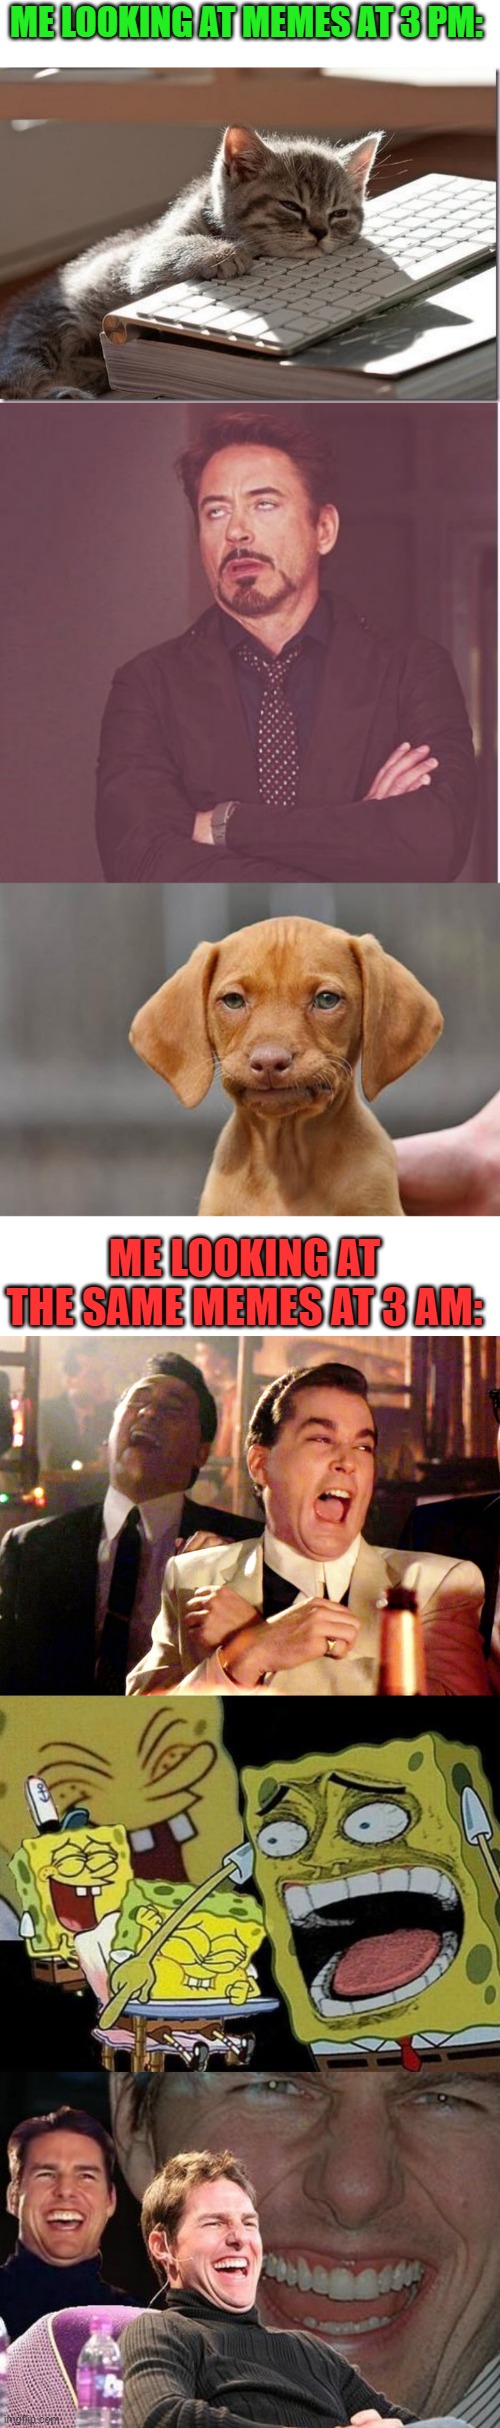 Memes in a nutshell | ME LOOKING AT MEMES AT 3 PM:; ME LOOKING AT THE SAME MEMES AT 3 AM: | image tagged in bored keyboard cat,memes,face you make robert downey jr,dissapointed puppy,tom cruise laugh,funny | made w/ Imgflip meme maker